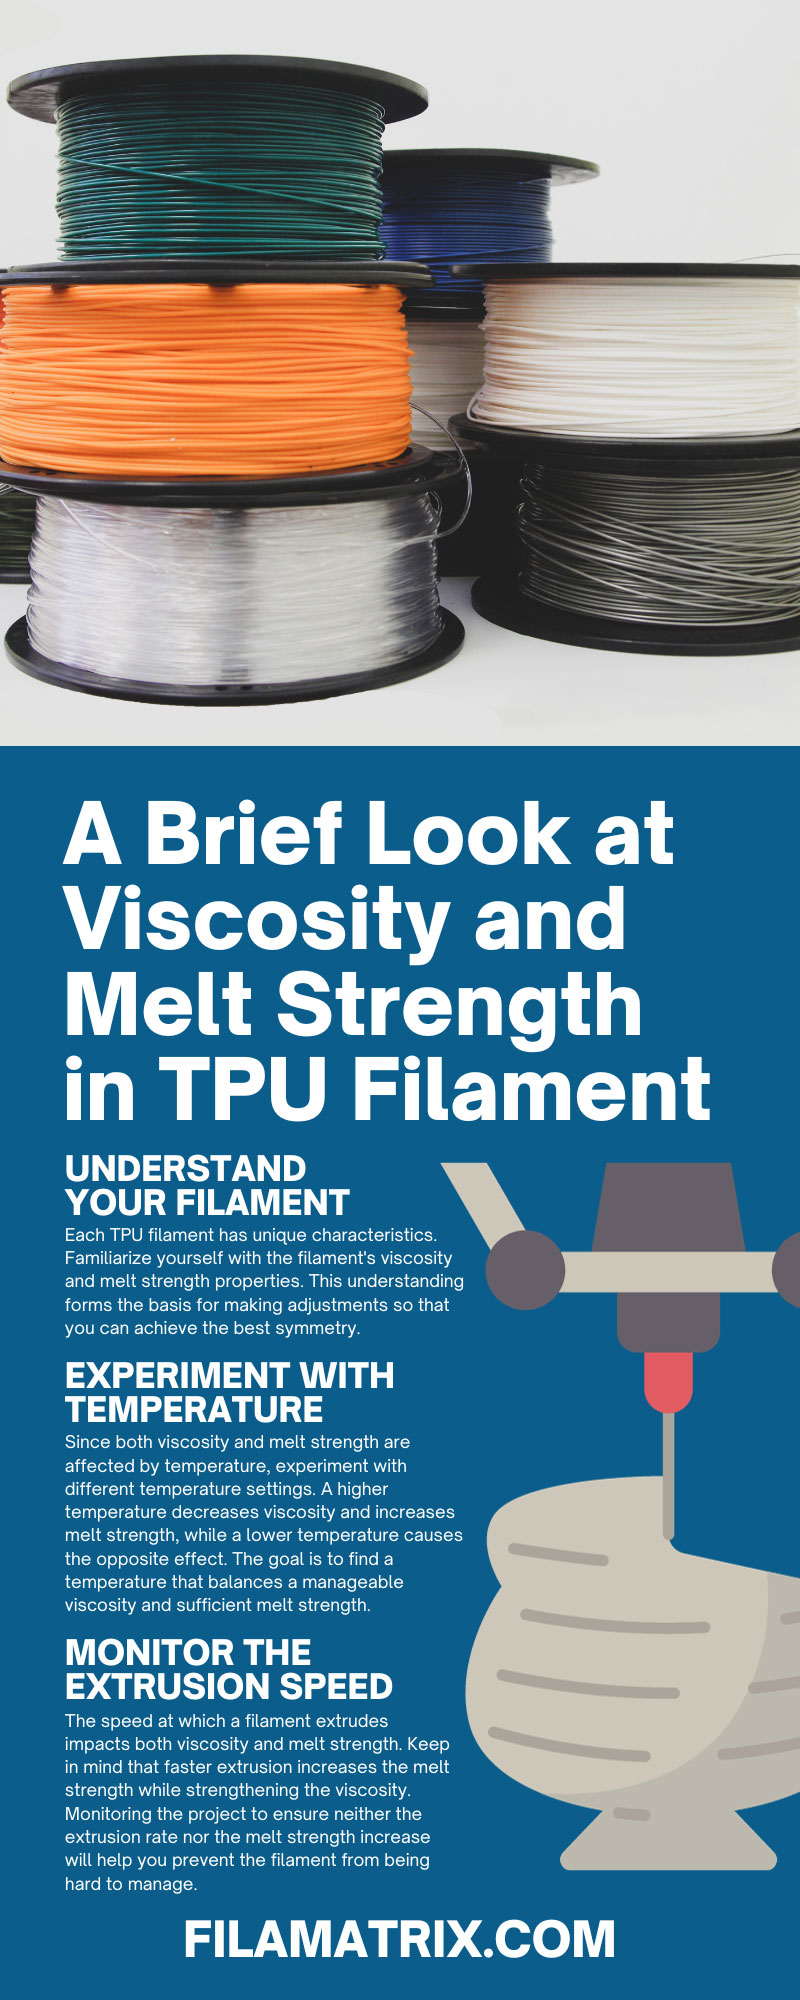 A Brief Look at Viscosity and Melt Strength in TPU Filament
